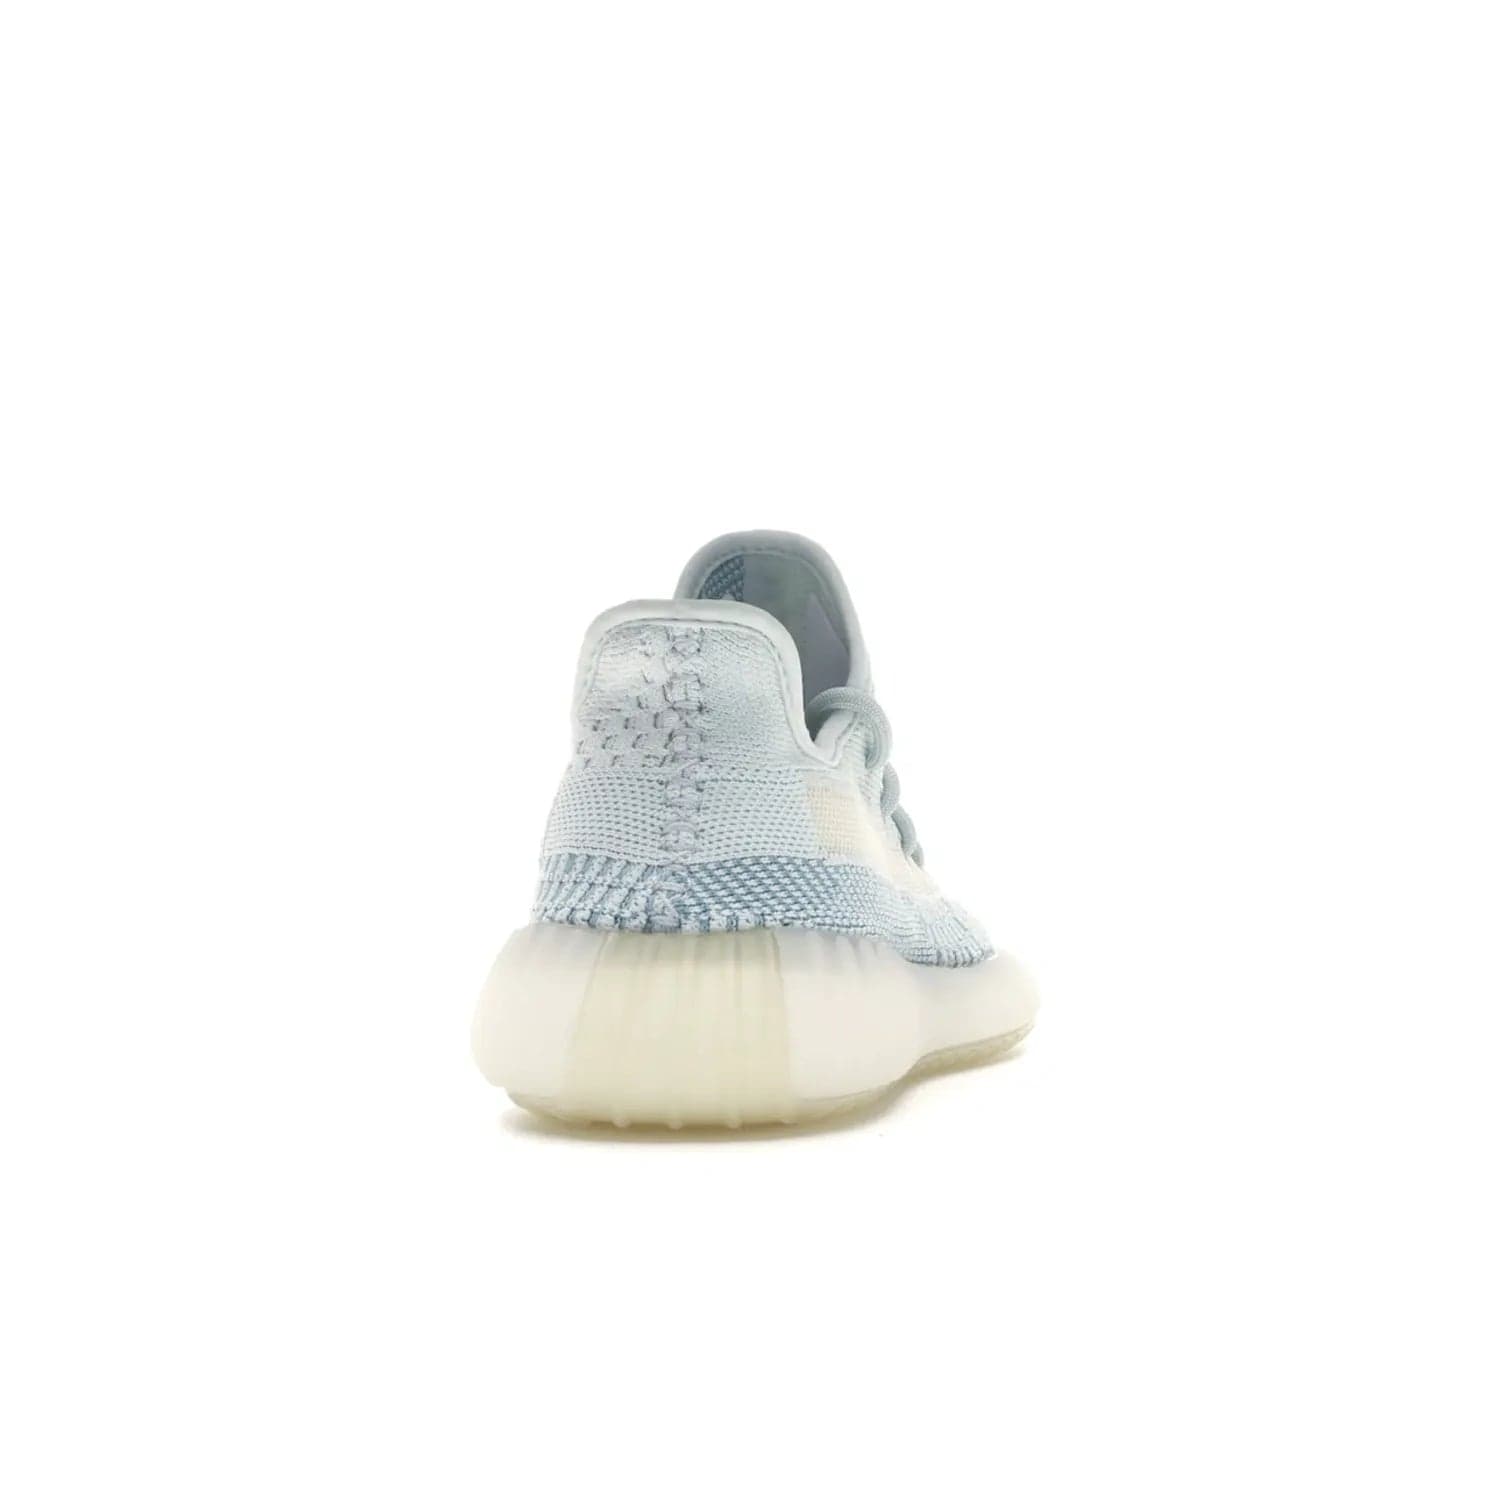 adidas Yeezy Boost 350 V2 Cloud White (Non-Reflective) - Image 29 - Only at www.BallersClubKickz.com - Uniquely designed adidas Yeezy Boost 350 V2 Cloud White (Non-Reflective) with a Primeknit upper in shades of cream and blue with a contrasting hard sole. A fashion-forward sneaker with a transparent strip and blue-and-white patterns.